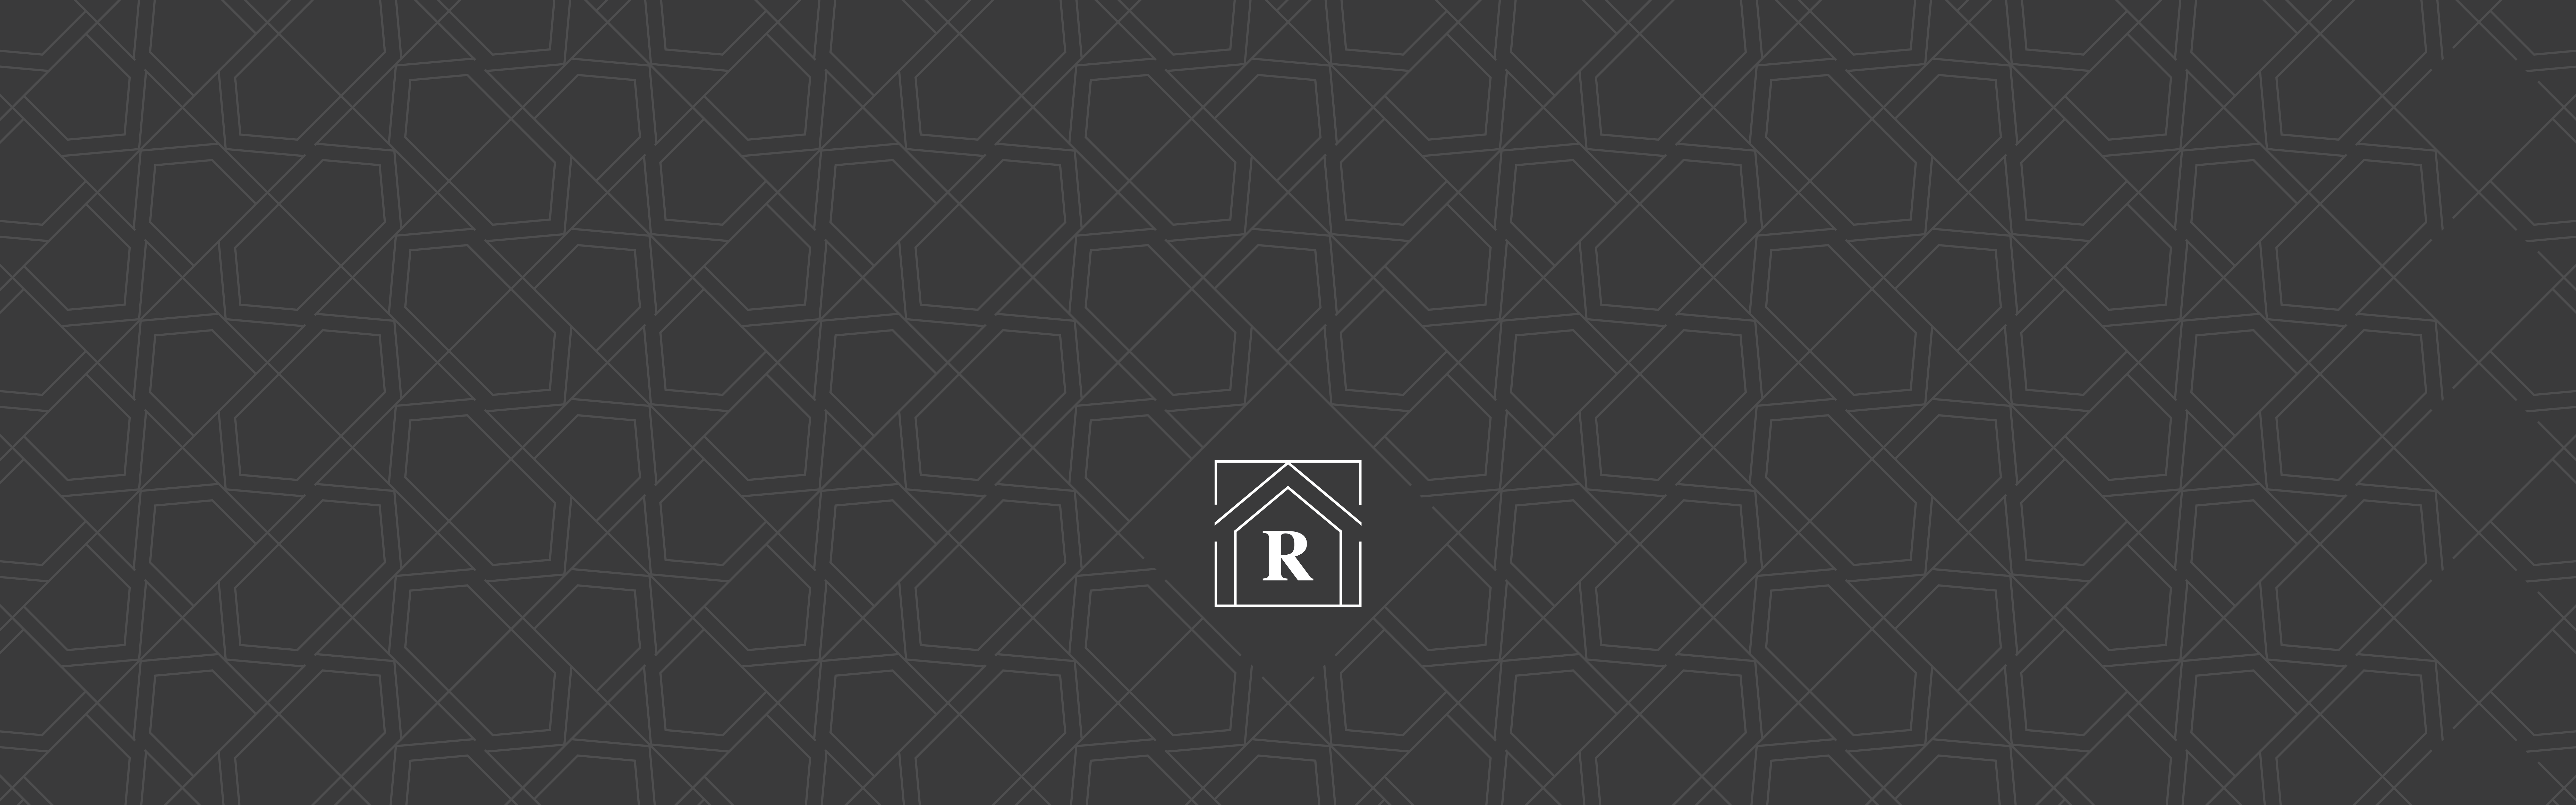 The image displays a dark background with a geometric pattern comprising repeated lines creating a series of interconnected shapes. At the center, there's a hexagon enclosing the letter "R" in a stylized font